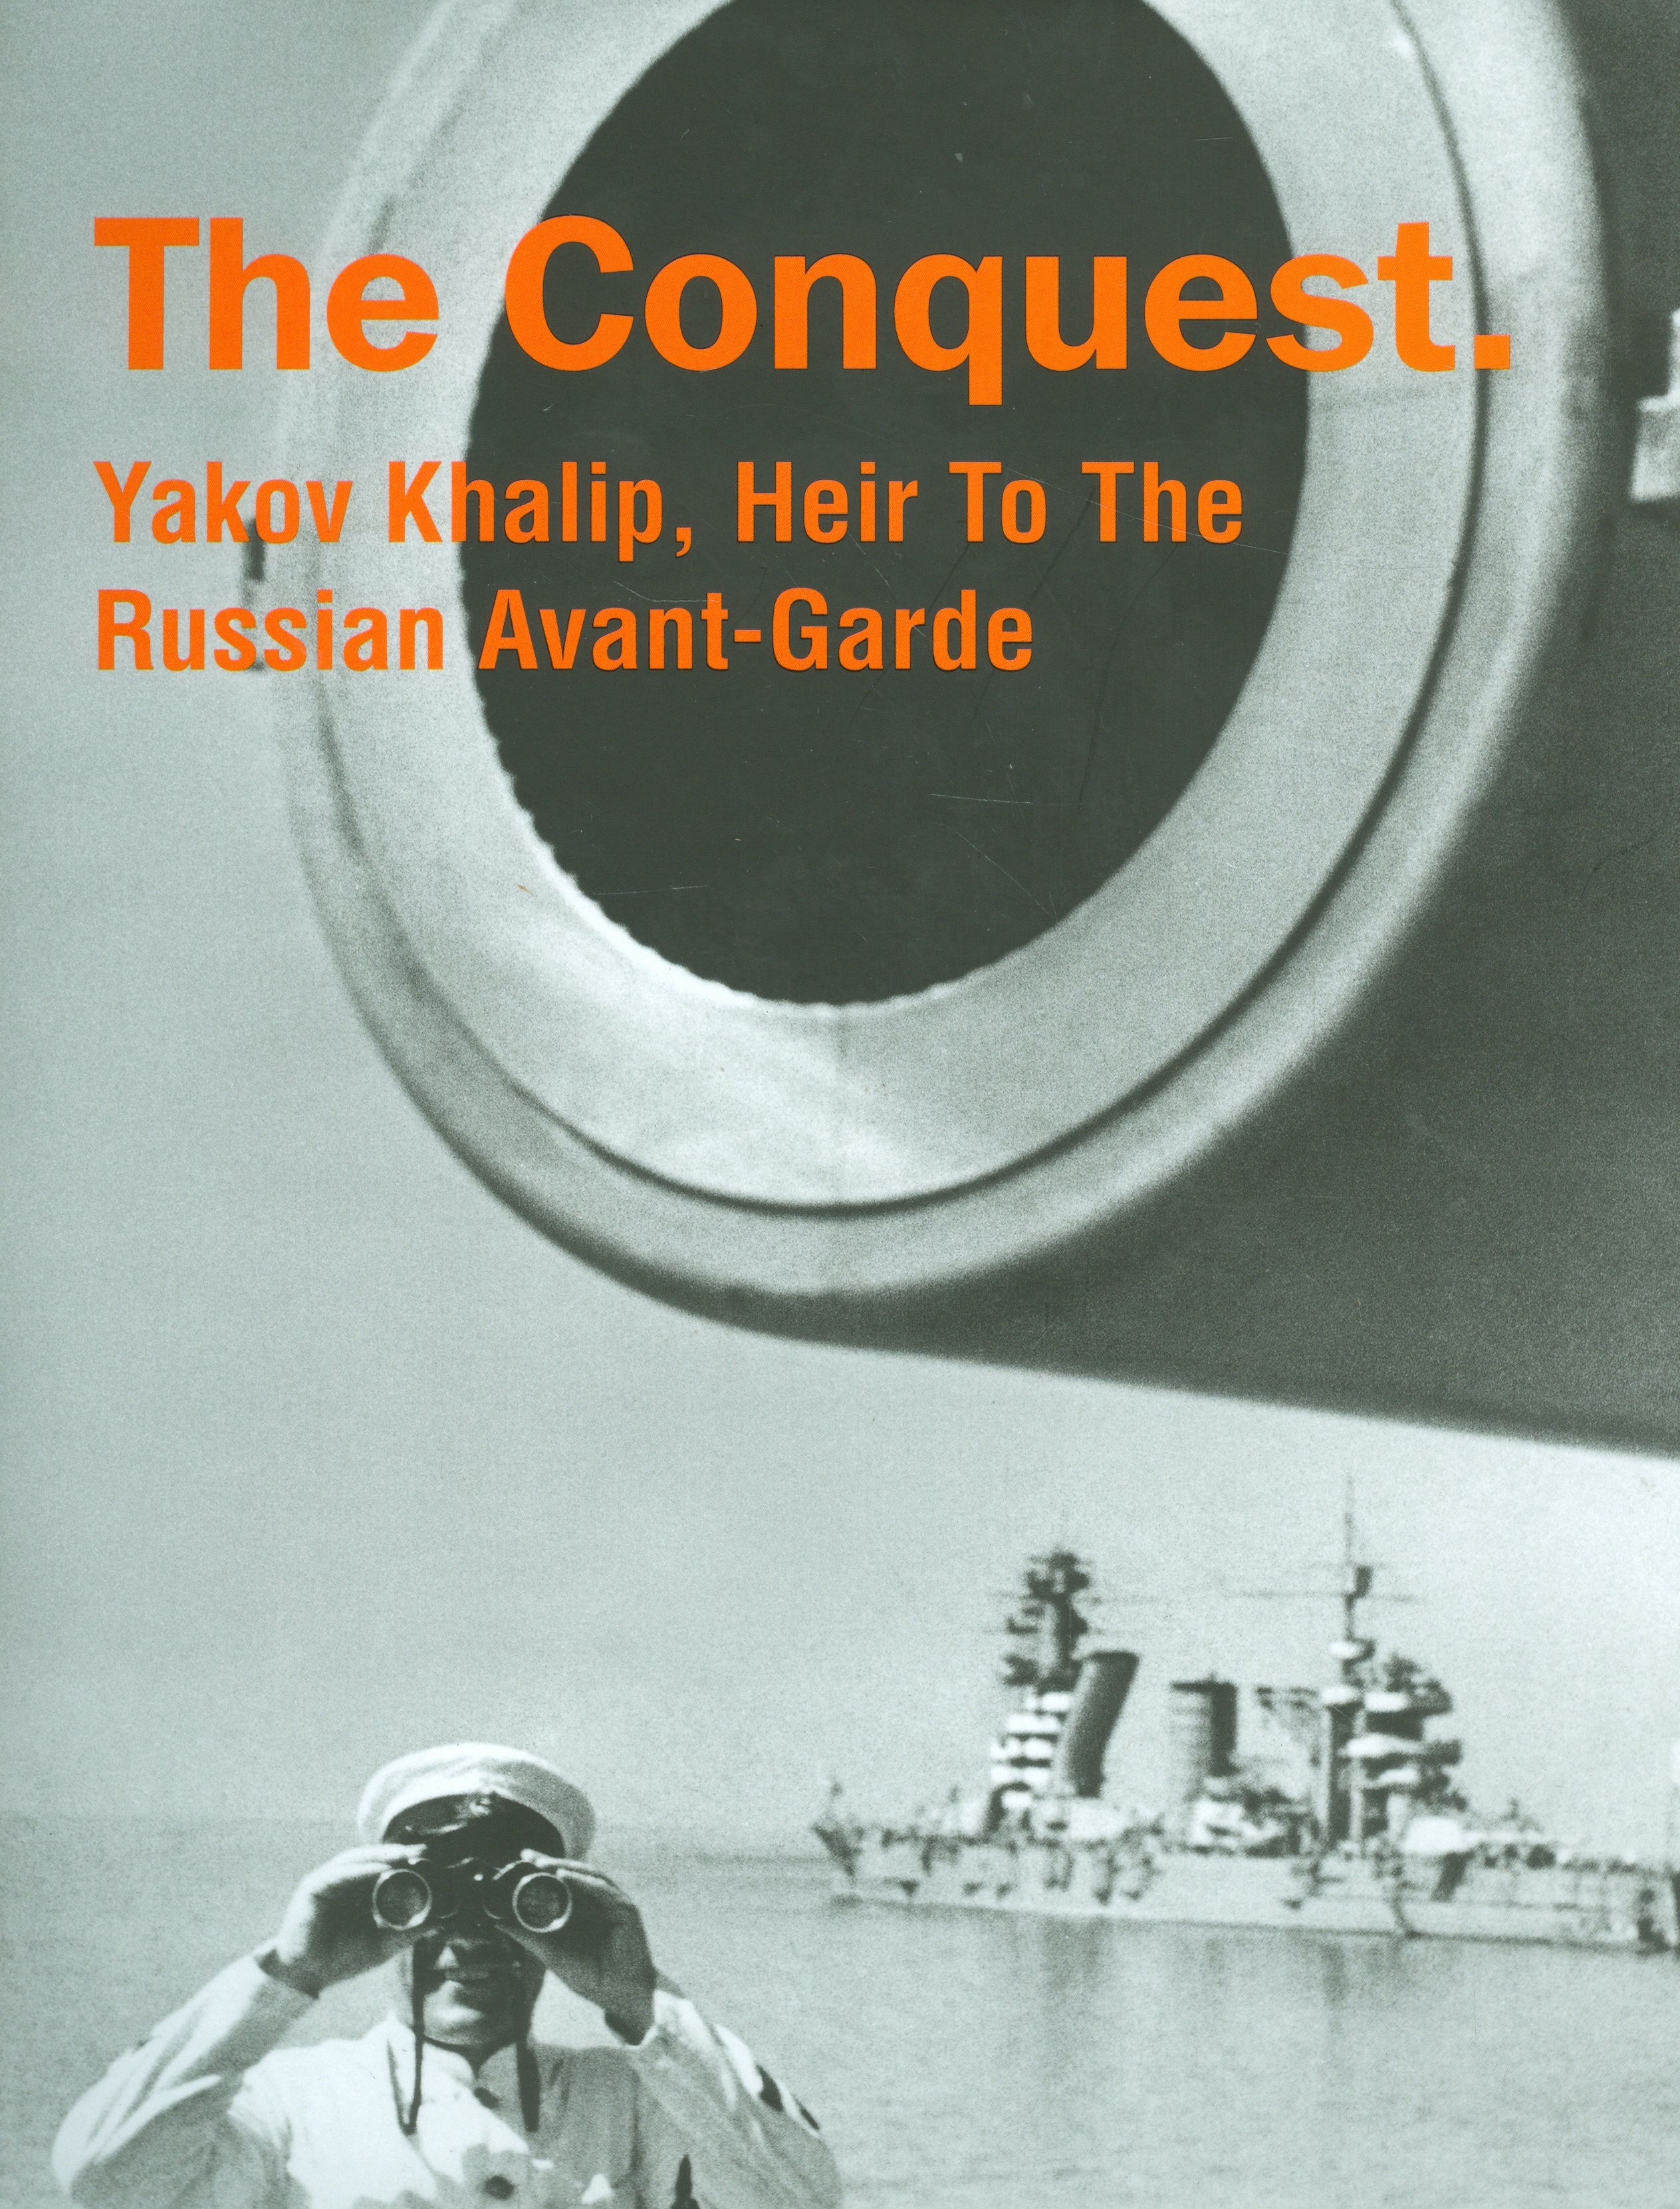 the conquest yakov khalip heir to the russian avant garde Фотоальбом.The Conquest.Yakov Khalip,Heir To The Russian Avant-Garde (на англ.яз.)